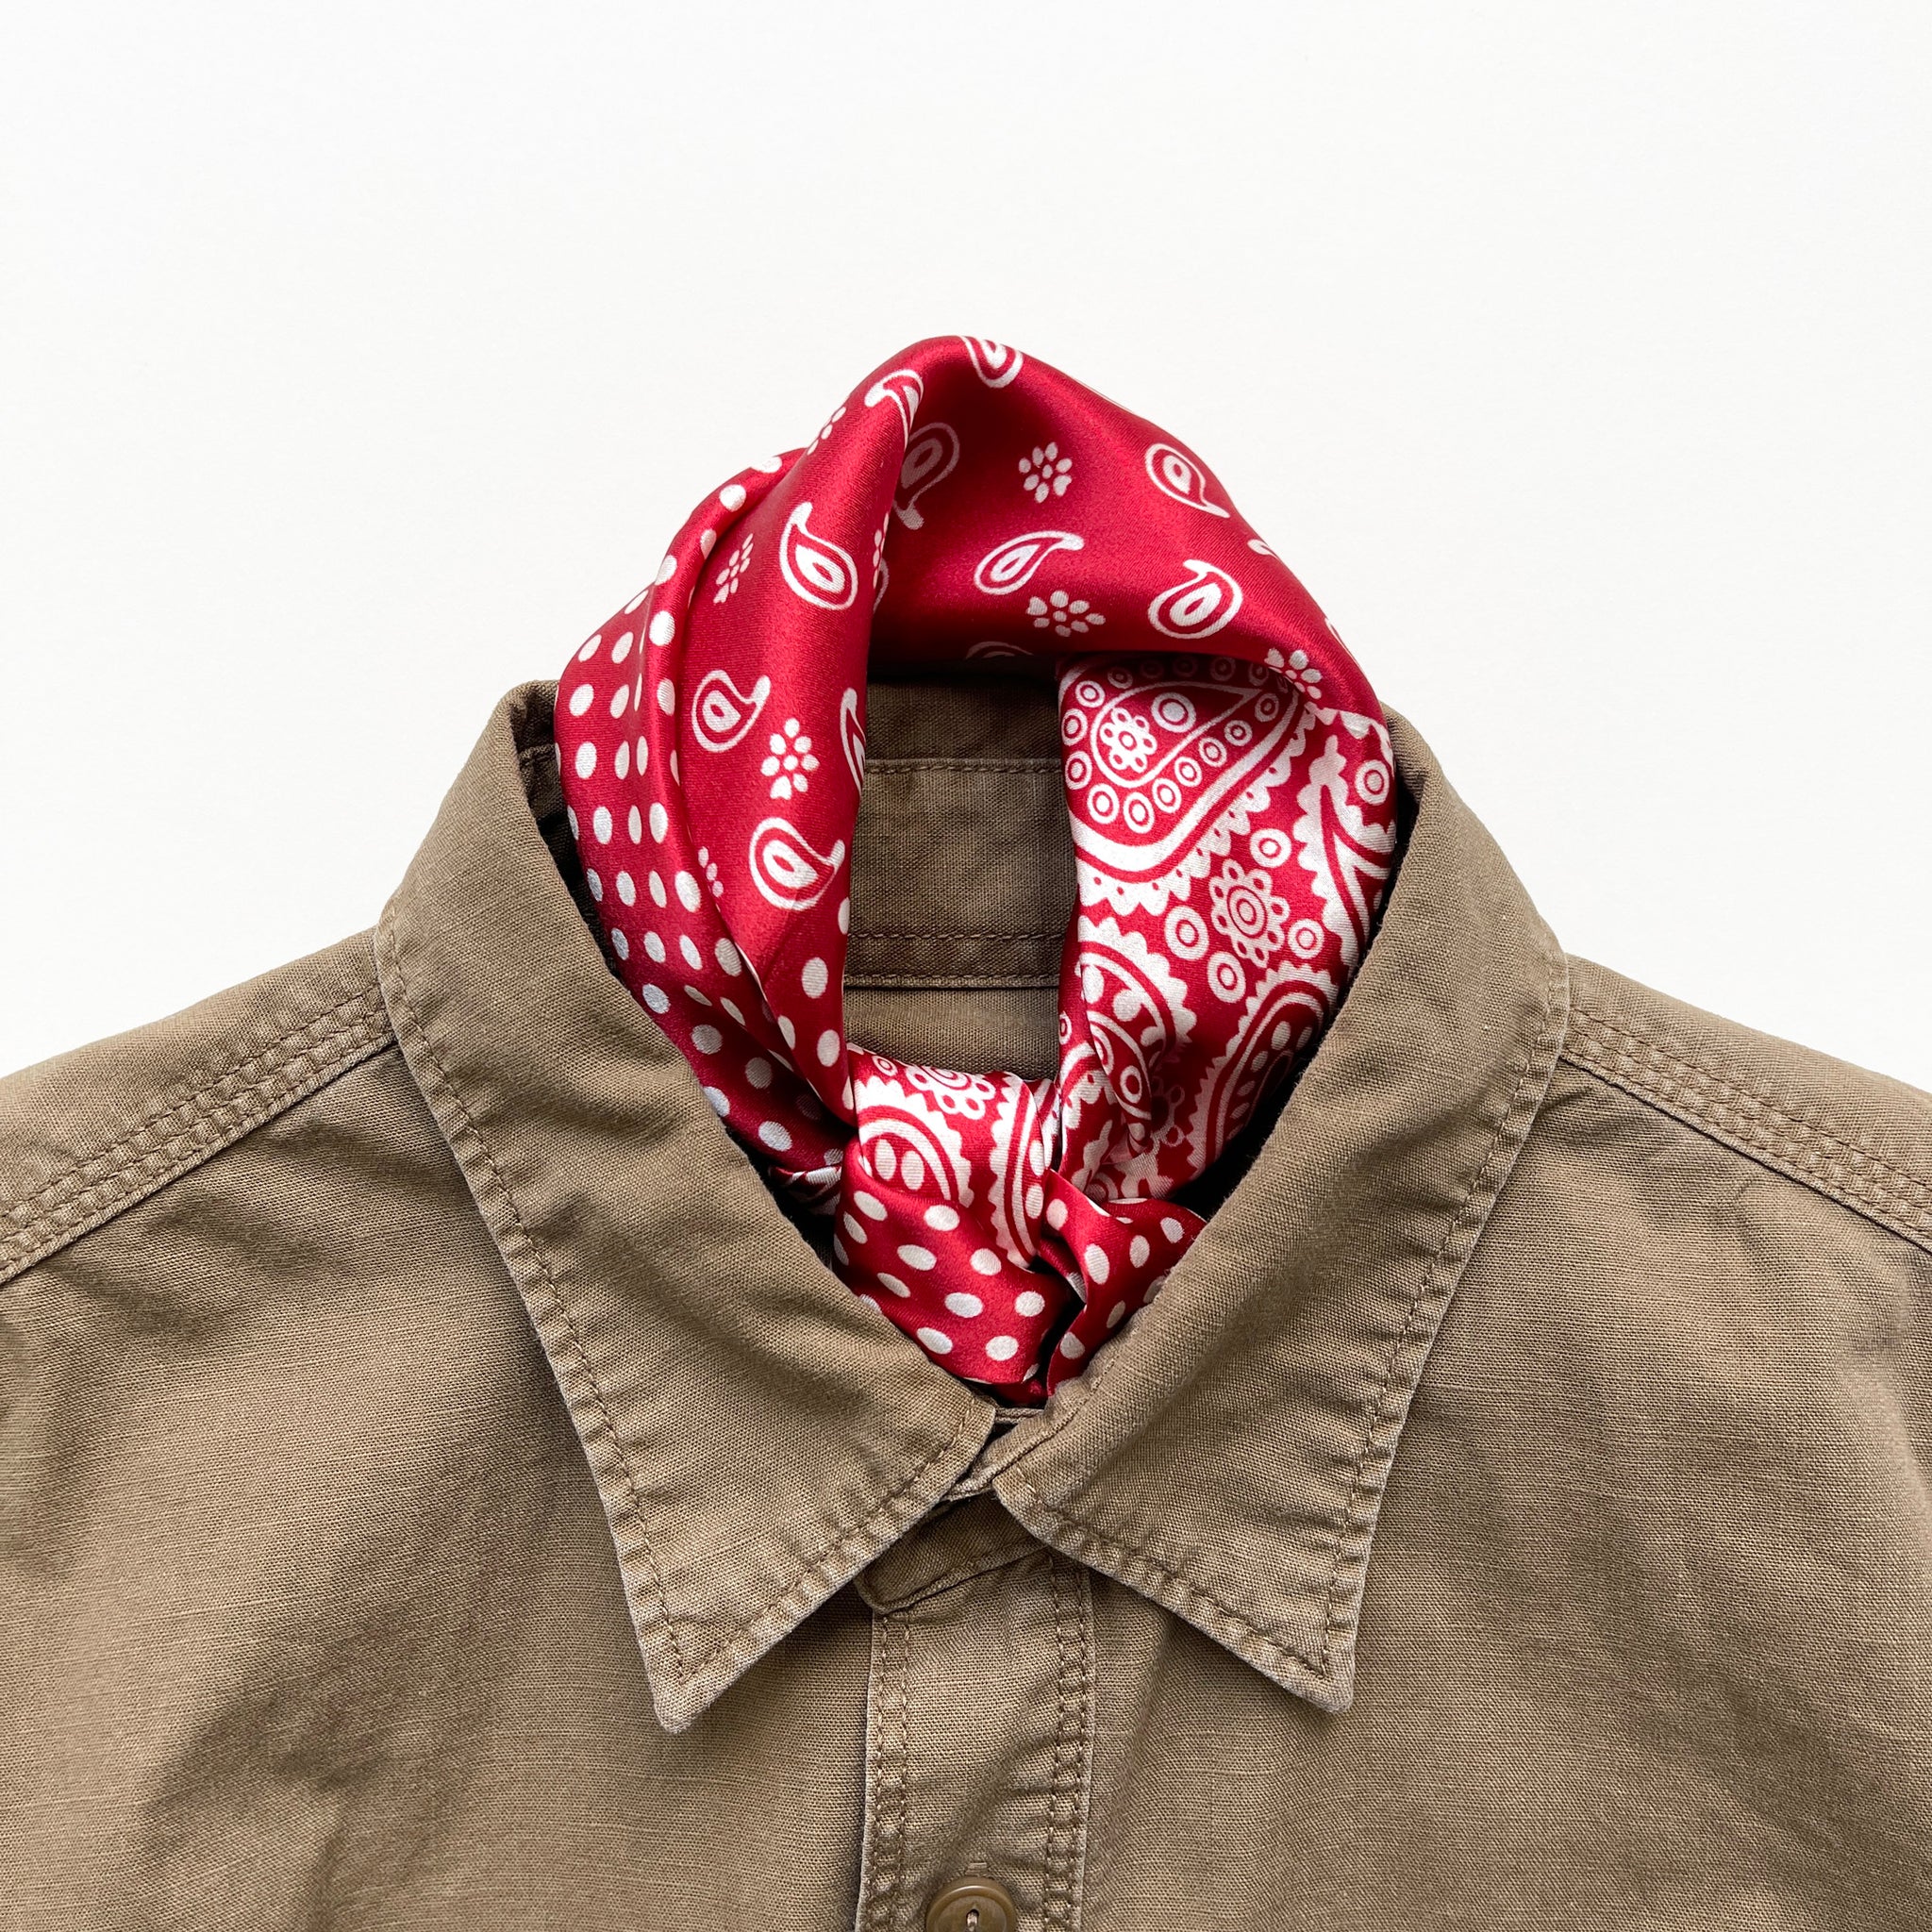 a vibrant red silk bandana scarf featuring paisley and polka dot pattern, knotted as a neckerchief, paired with a khaki men's shirt